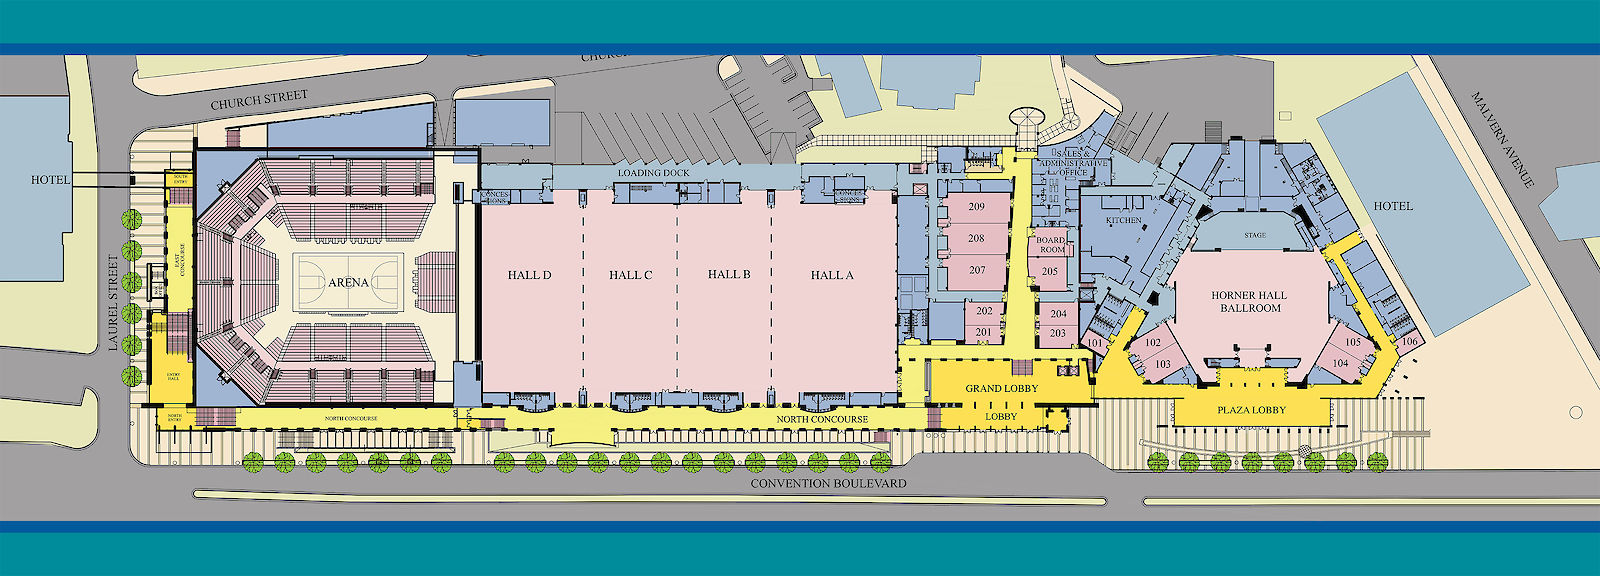 Hot Springs | Convention Center Map